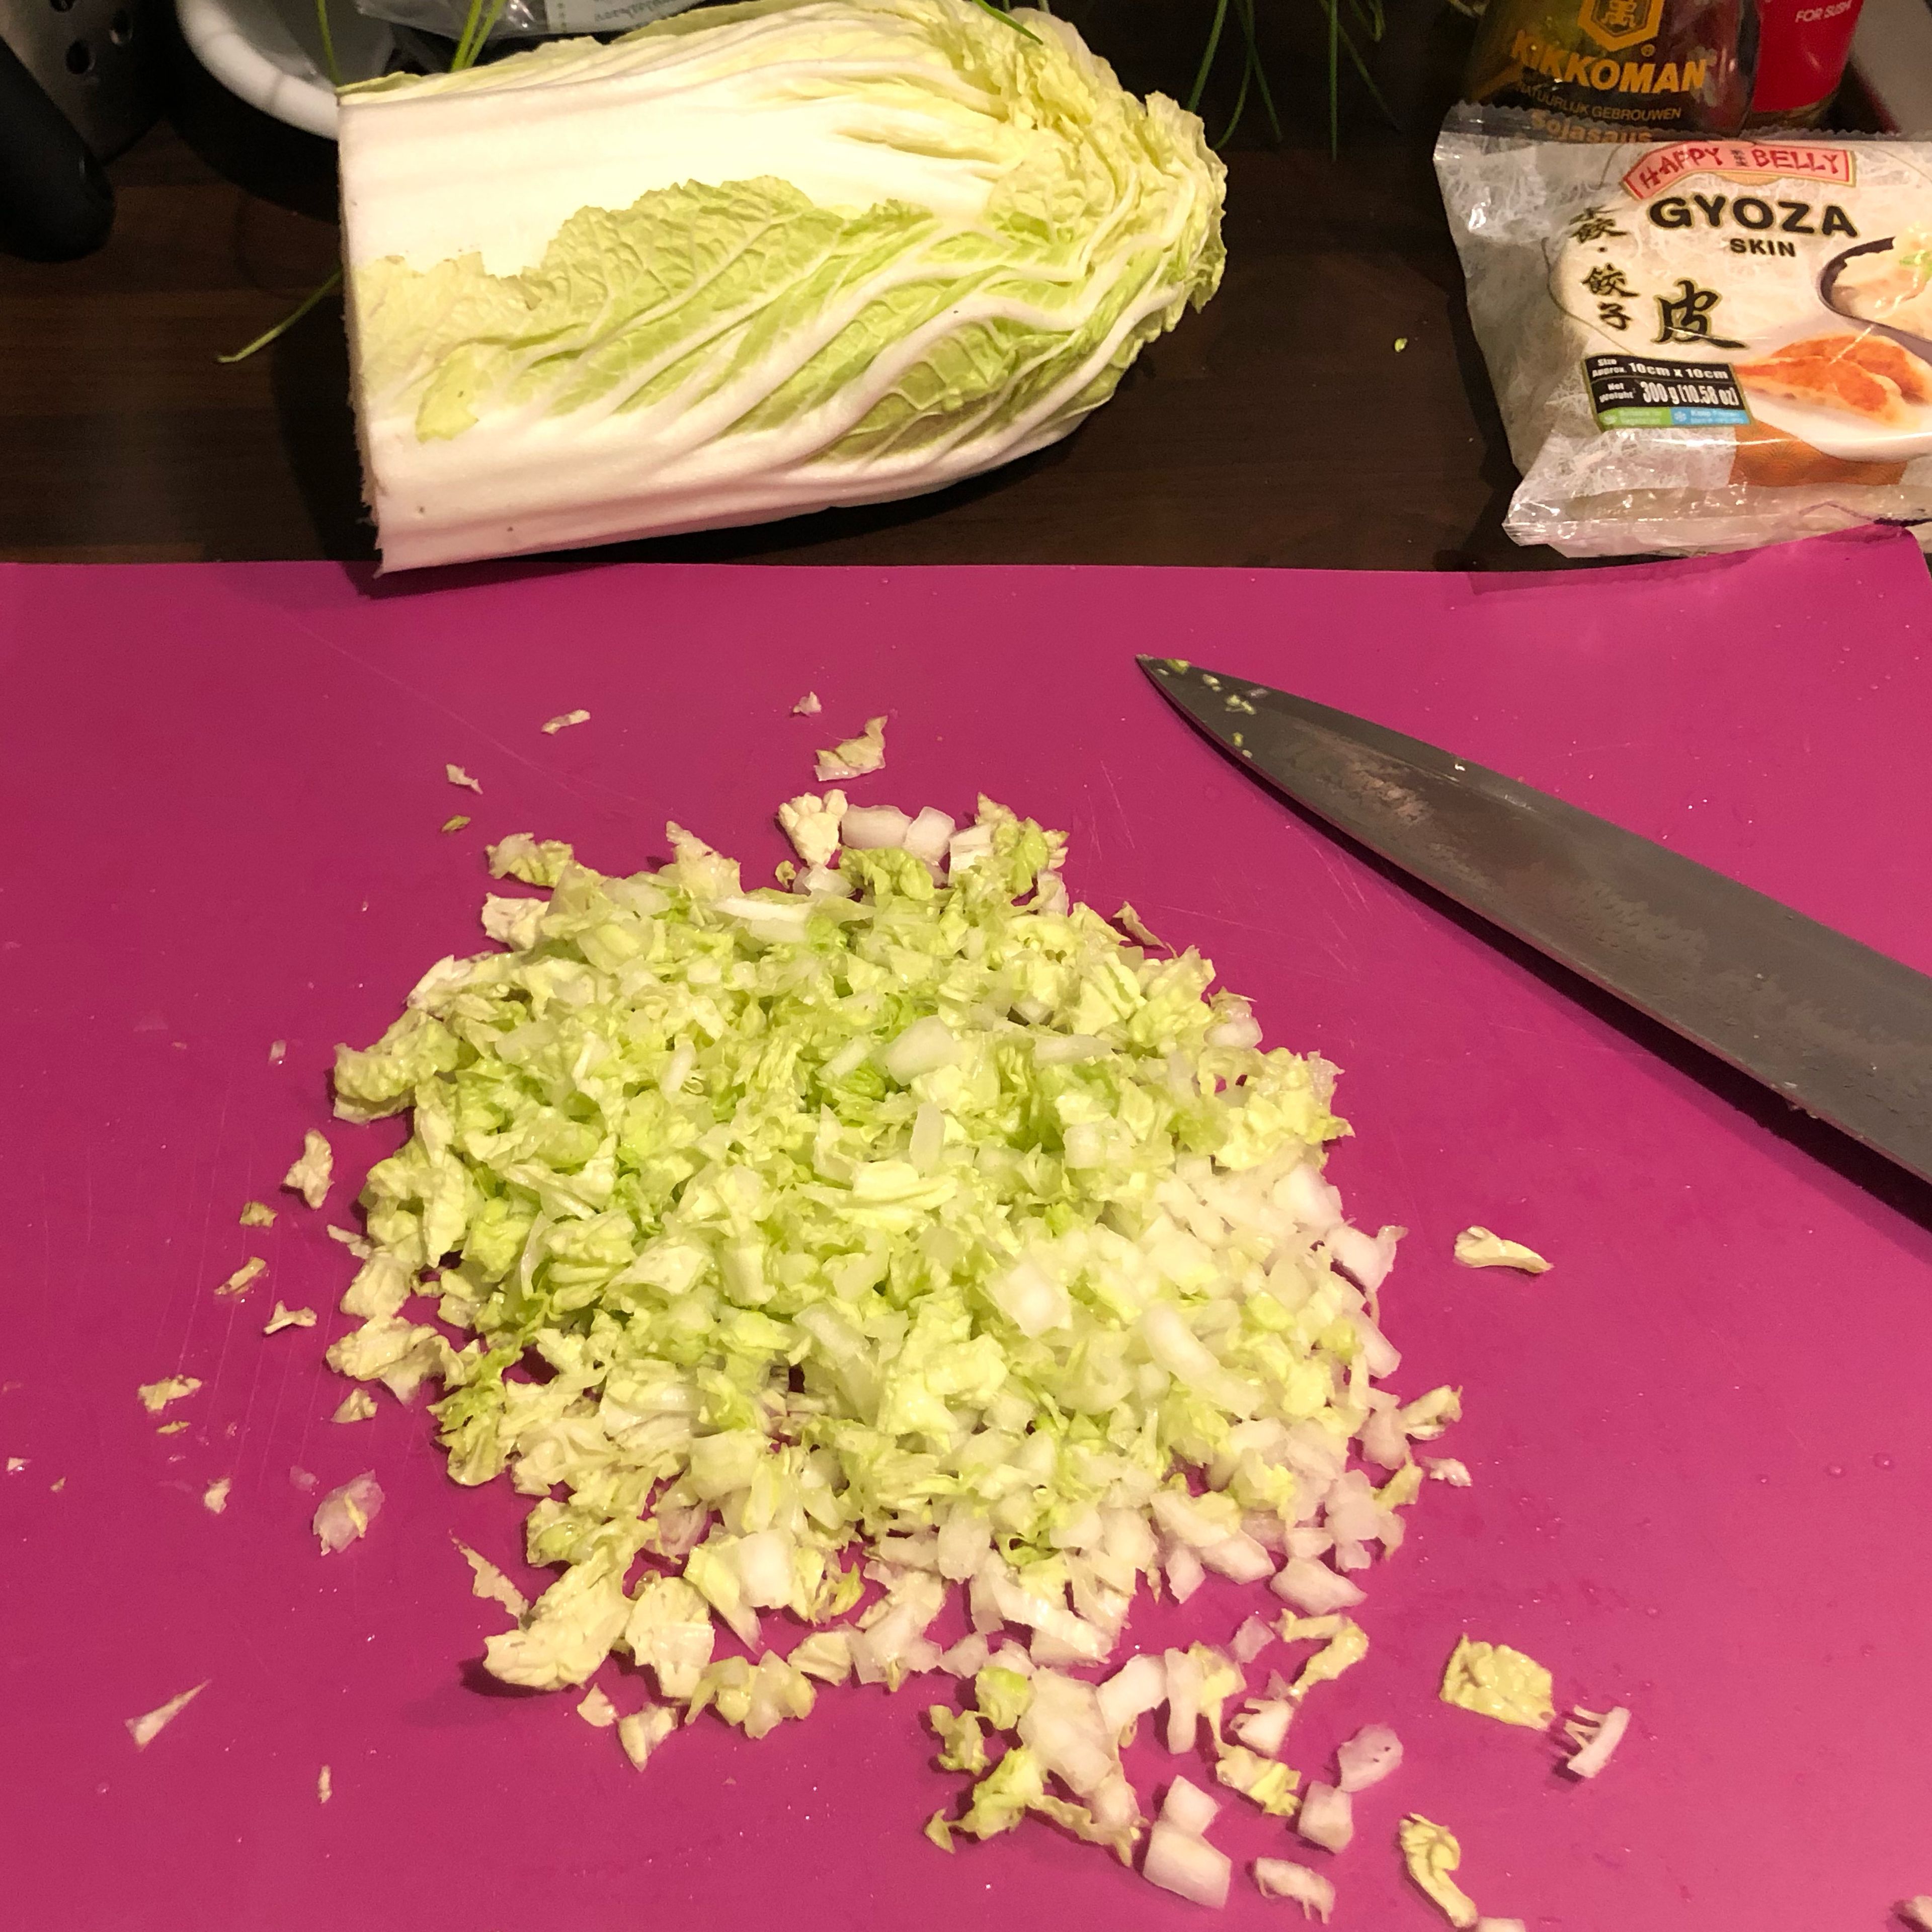 Chop the cabbage and spring onions into small pieces. Add to the bowl and mix it all together.